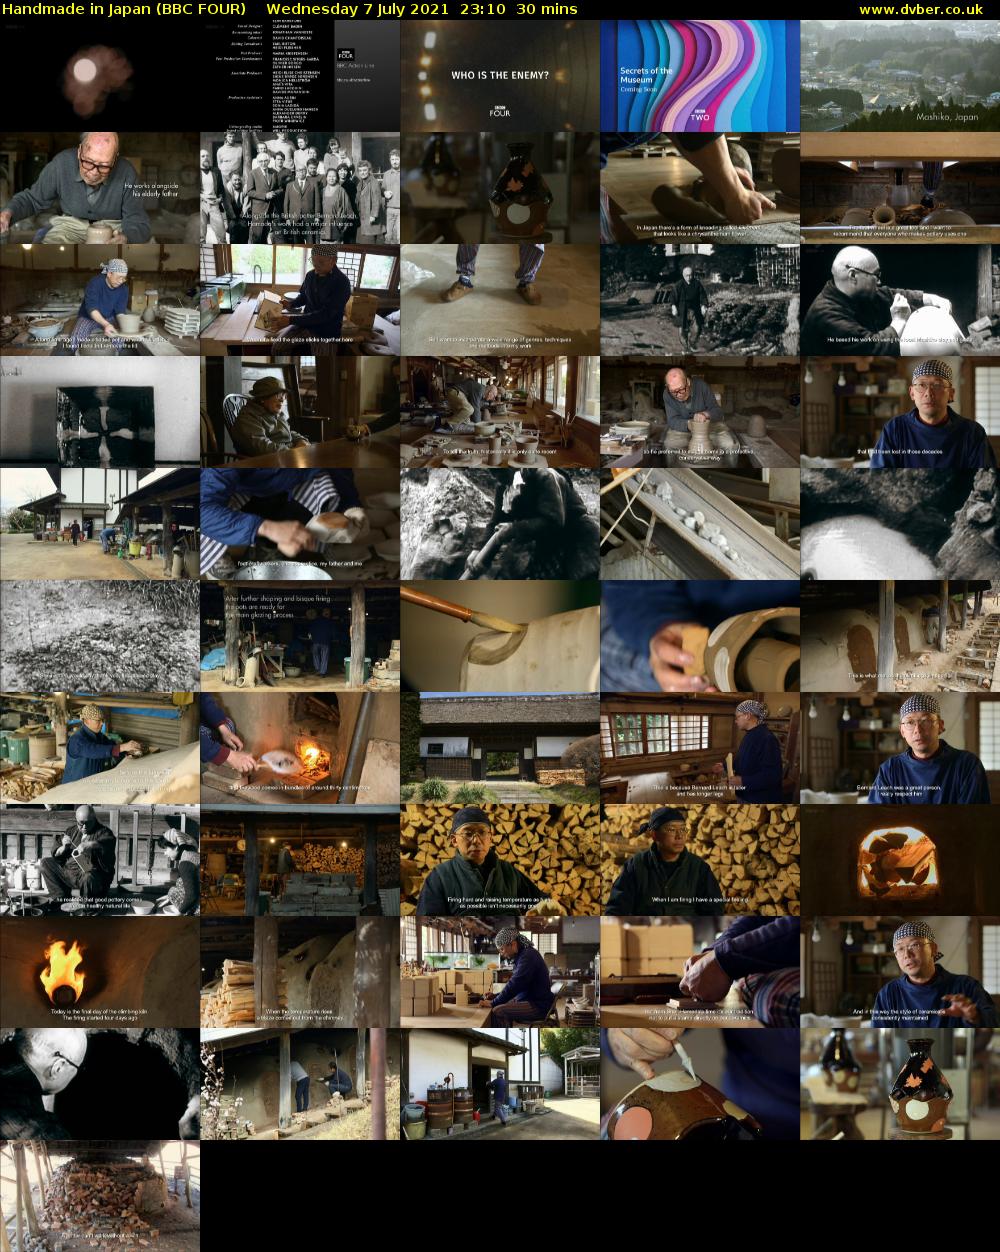 Handmade in Japan (BBC FOUR) Wednesday 7 July 2021 23:10 - 23:40